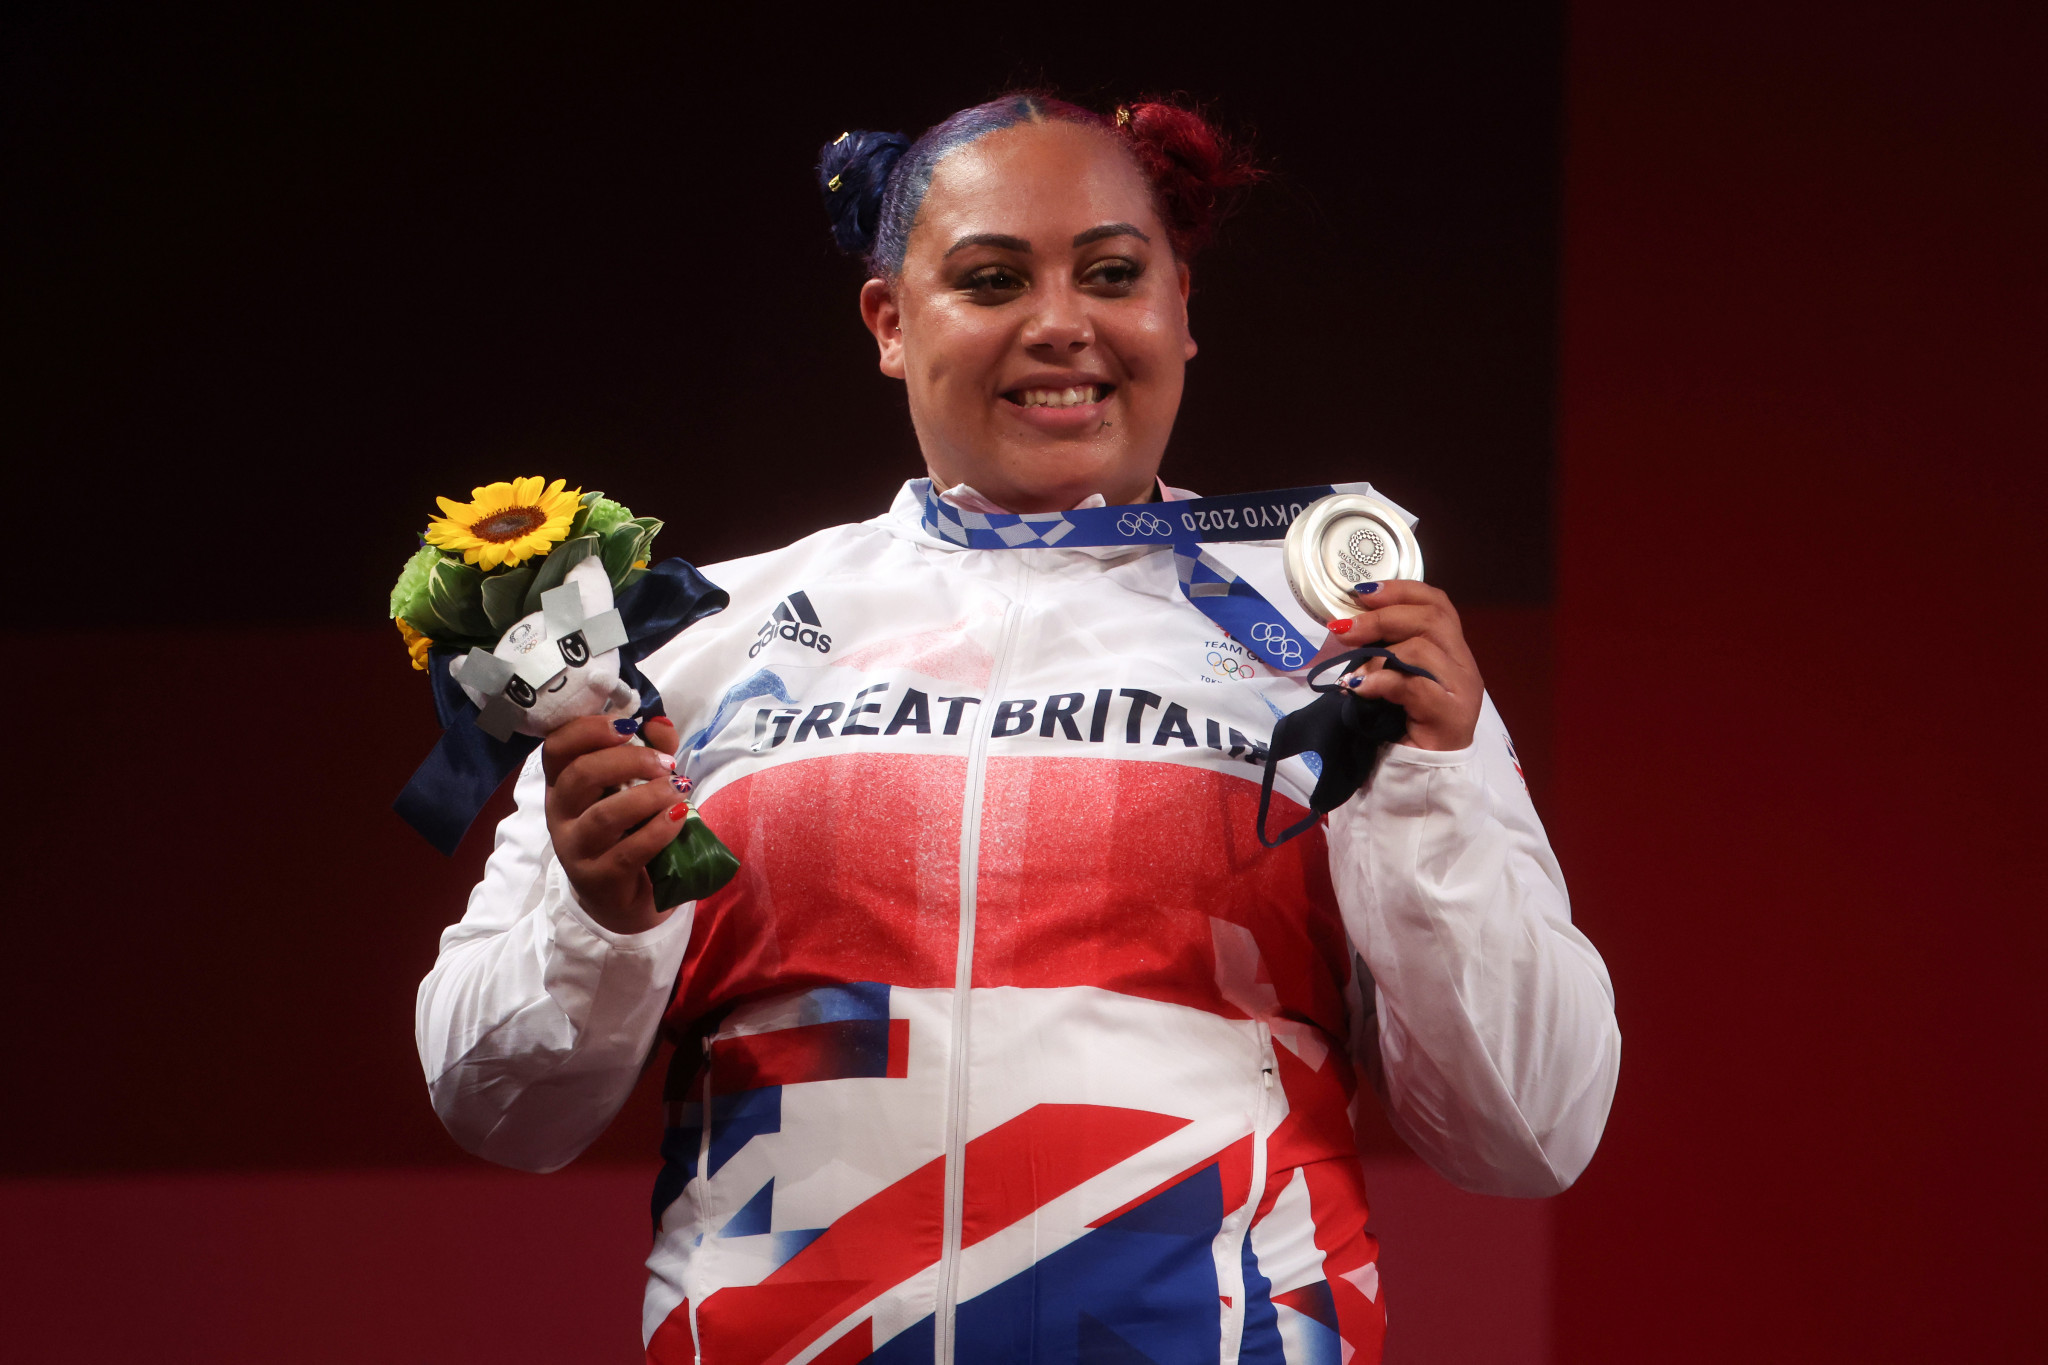 Weightlifter Emily Campbell, who won a silver medal at Tokyo 2020, is due to attend a ceremony to mark the British Olympic Association's partnership with Saint-Germain-en-Laye ©Getty Images